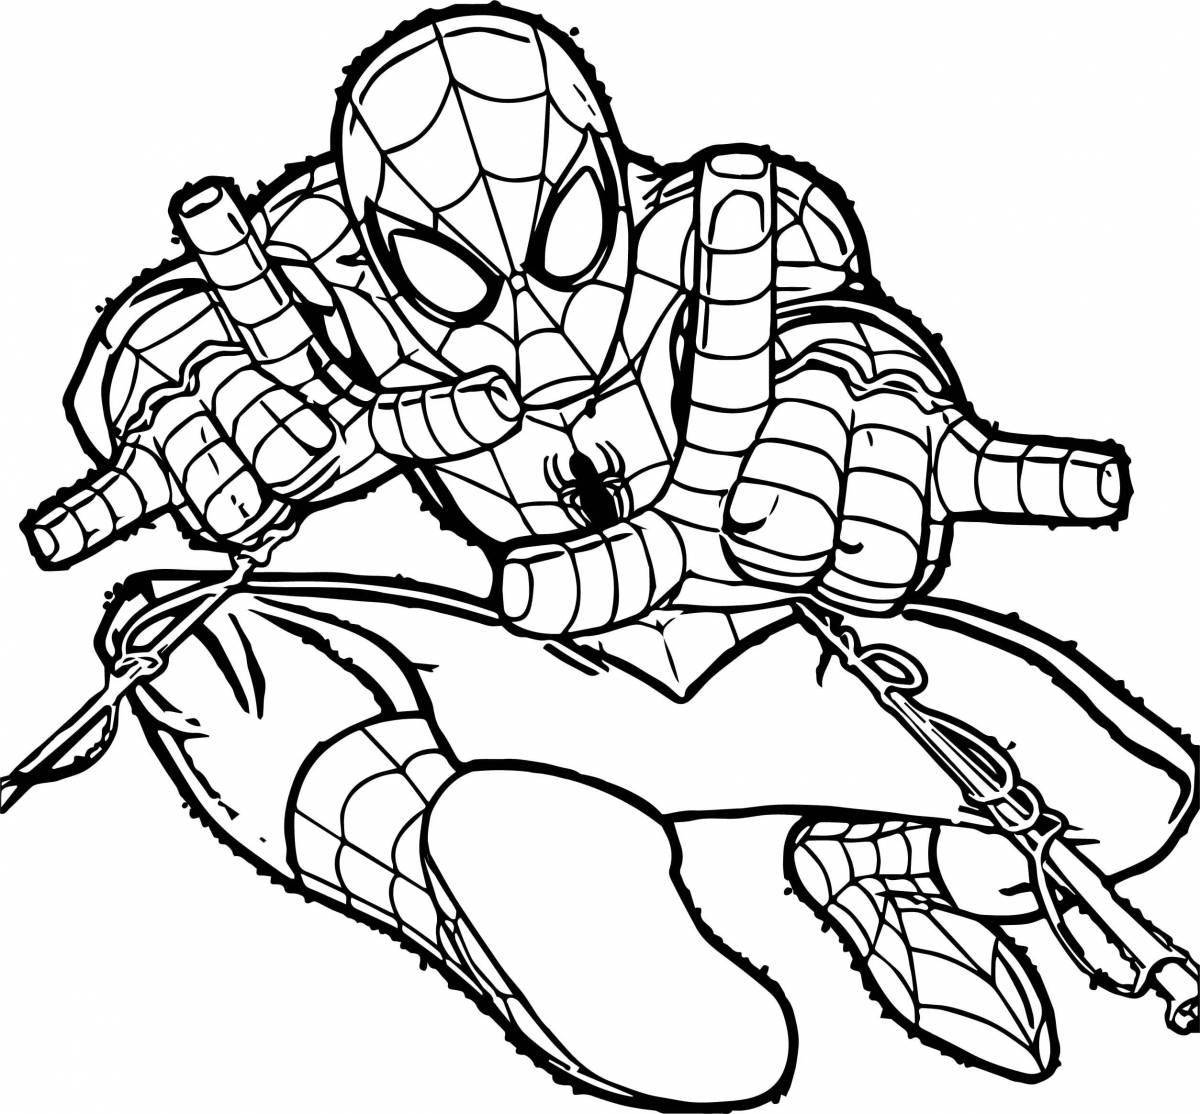 Spider-man fun coloring book for kids